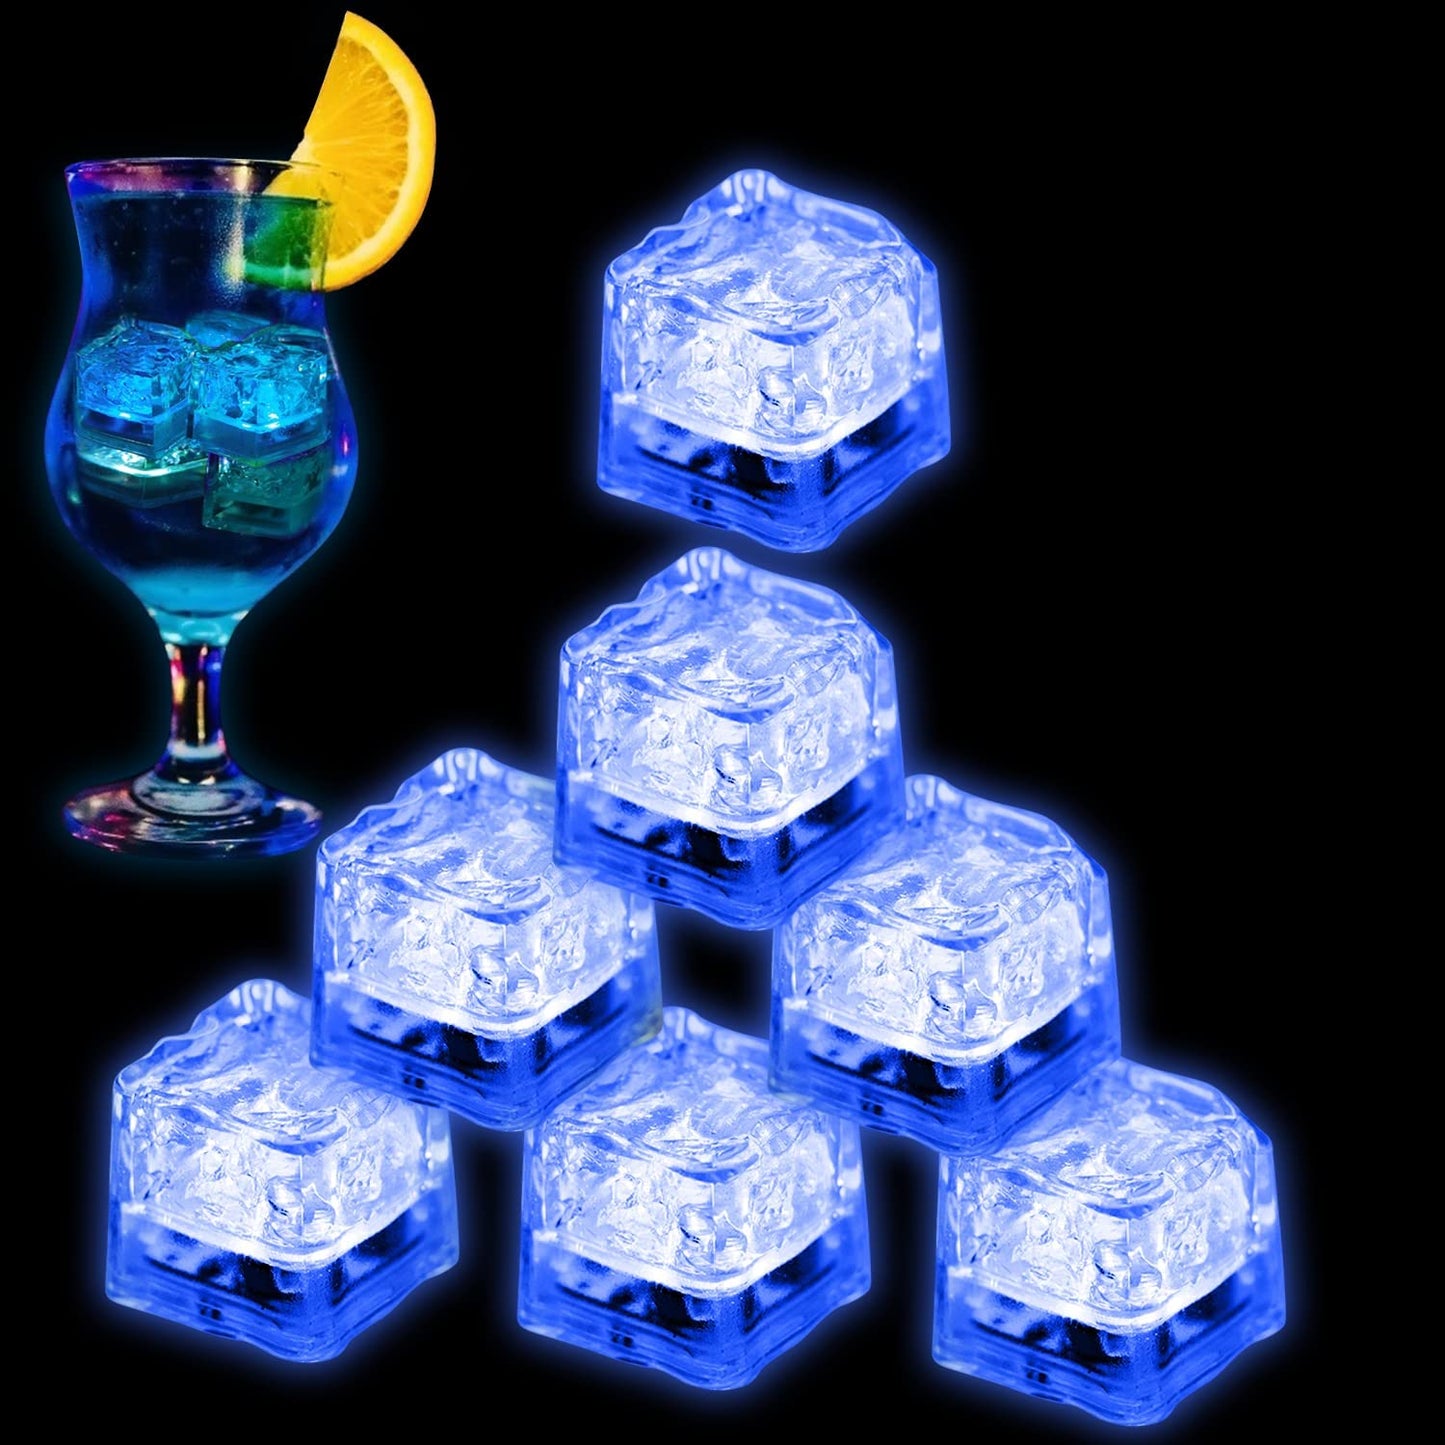 Light up Ice Cubes for Drinks,96 PCS White LED Ice Cubes Liquid Activated, Glow in the Dark Waterproof Ice Cubes for Home Bar Supplies Summer Party Wedding Decor